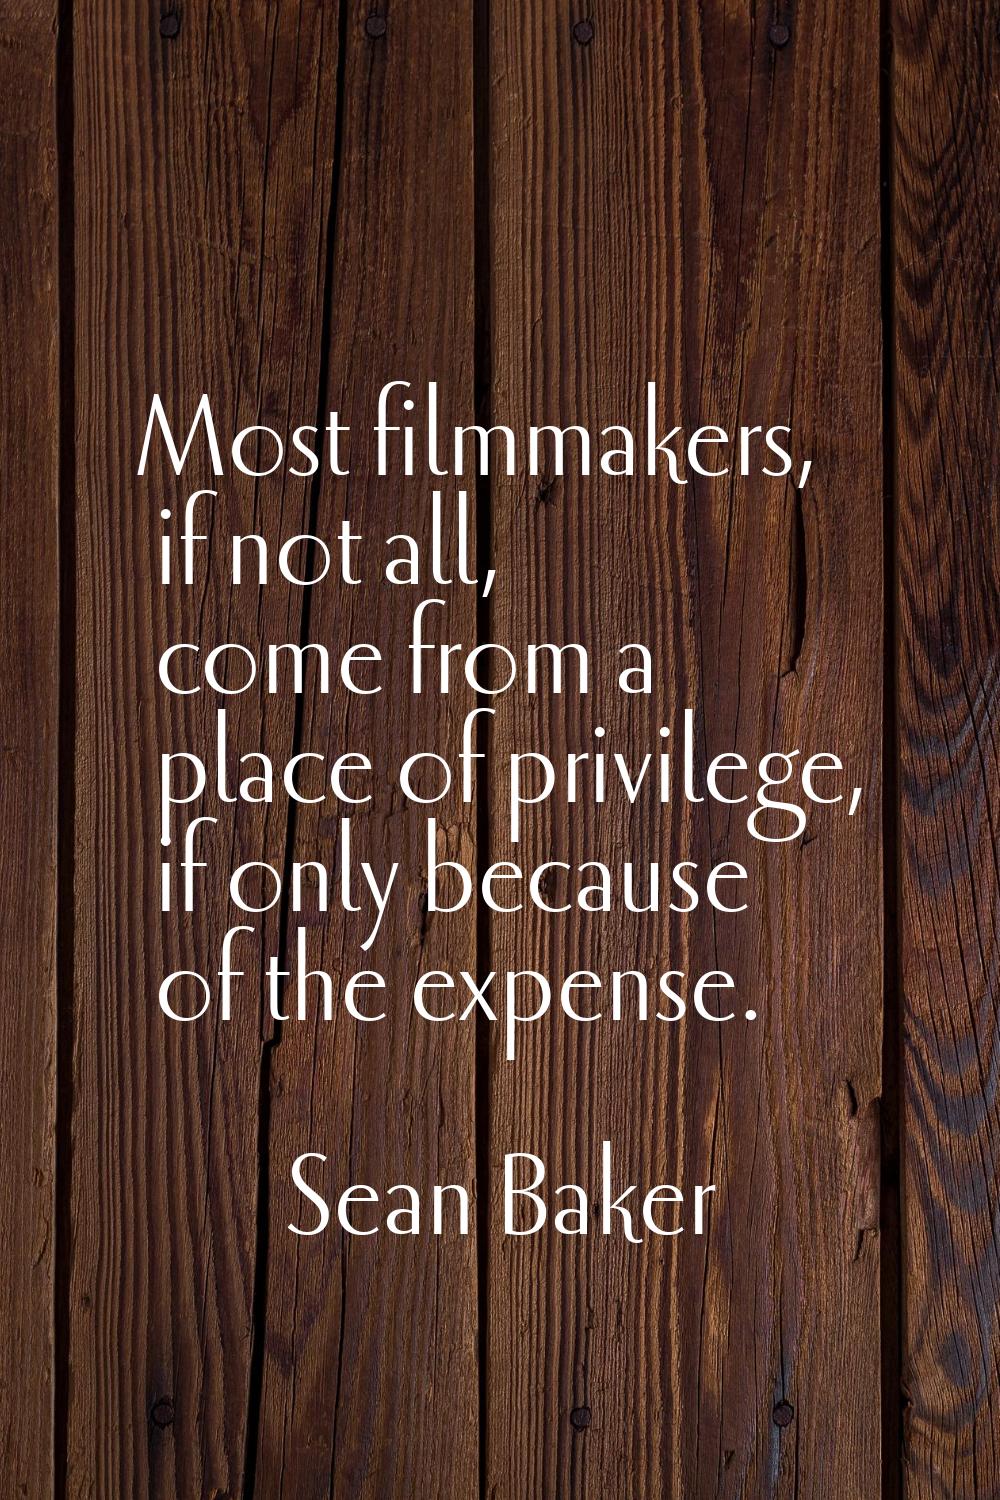 Most filmmakers, if not all, come from a place of privilege, if only because of the expense.